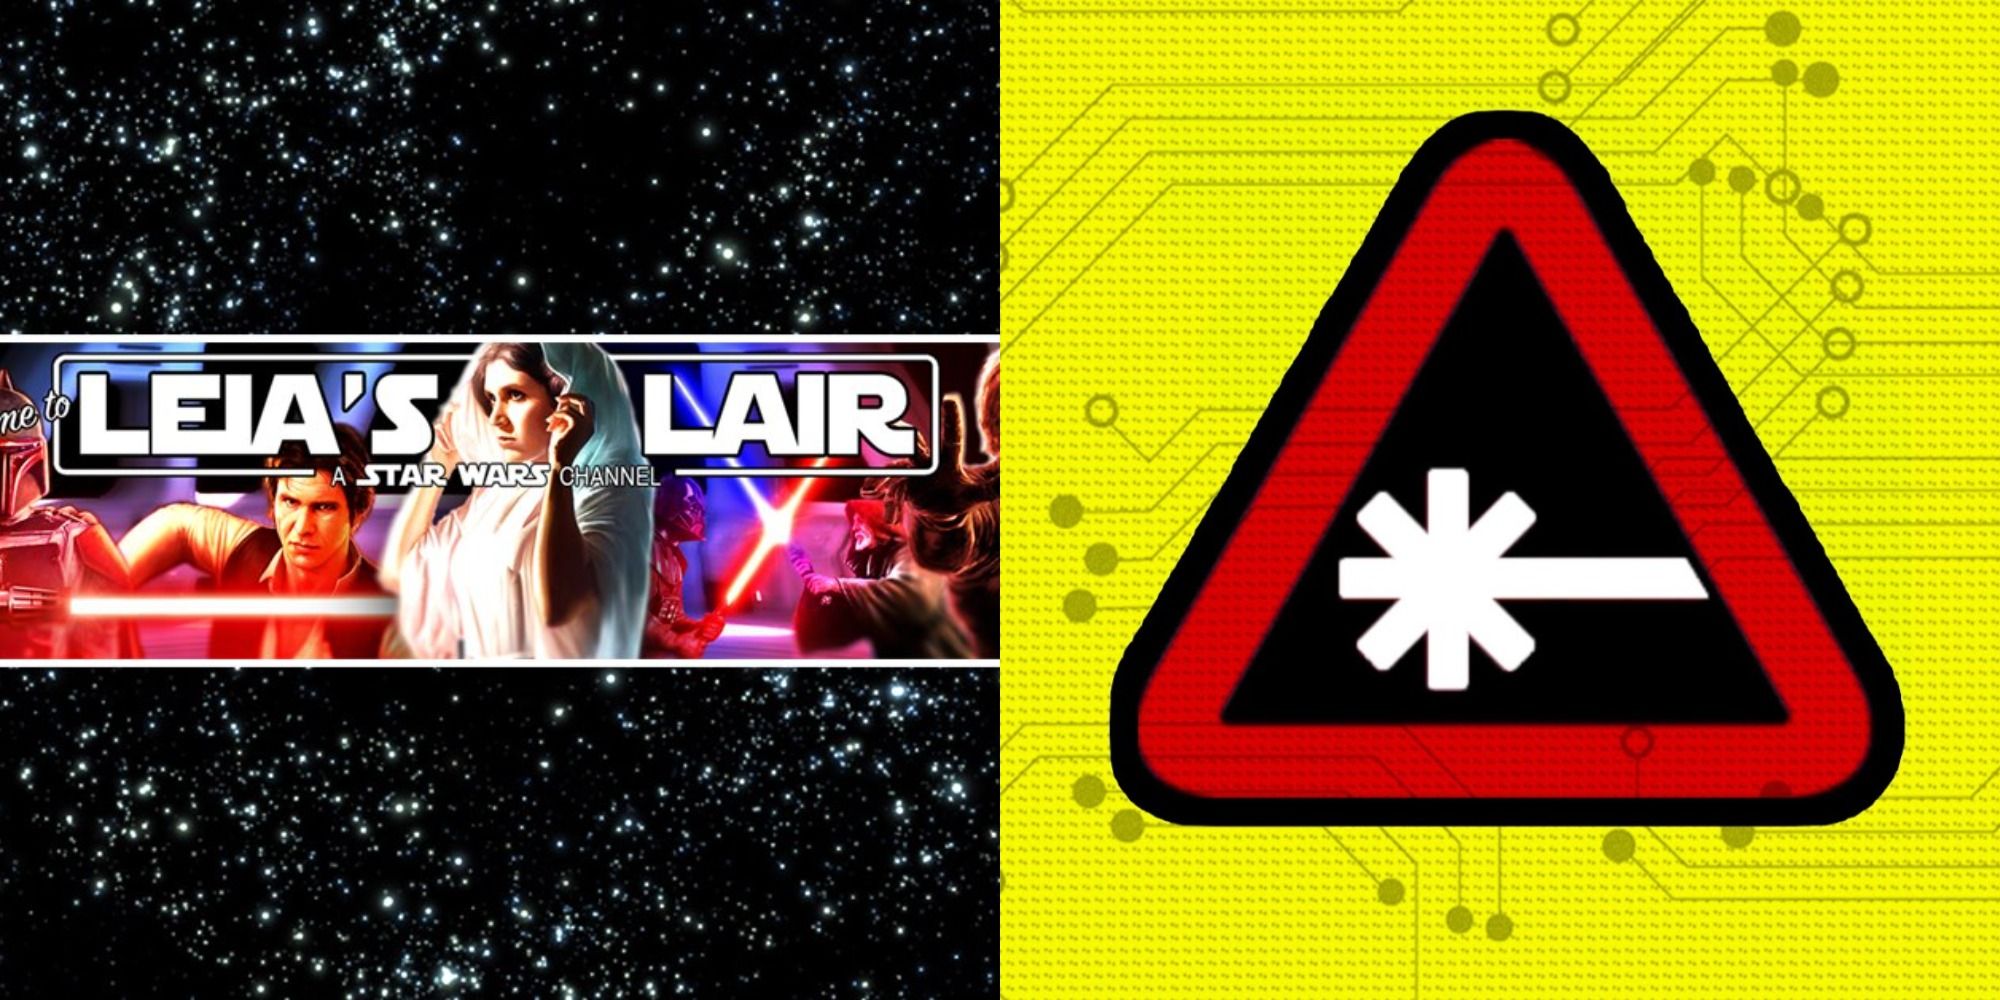 Split image showing logos for the YT channels Leia's Liar and Nerdist